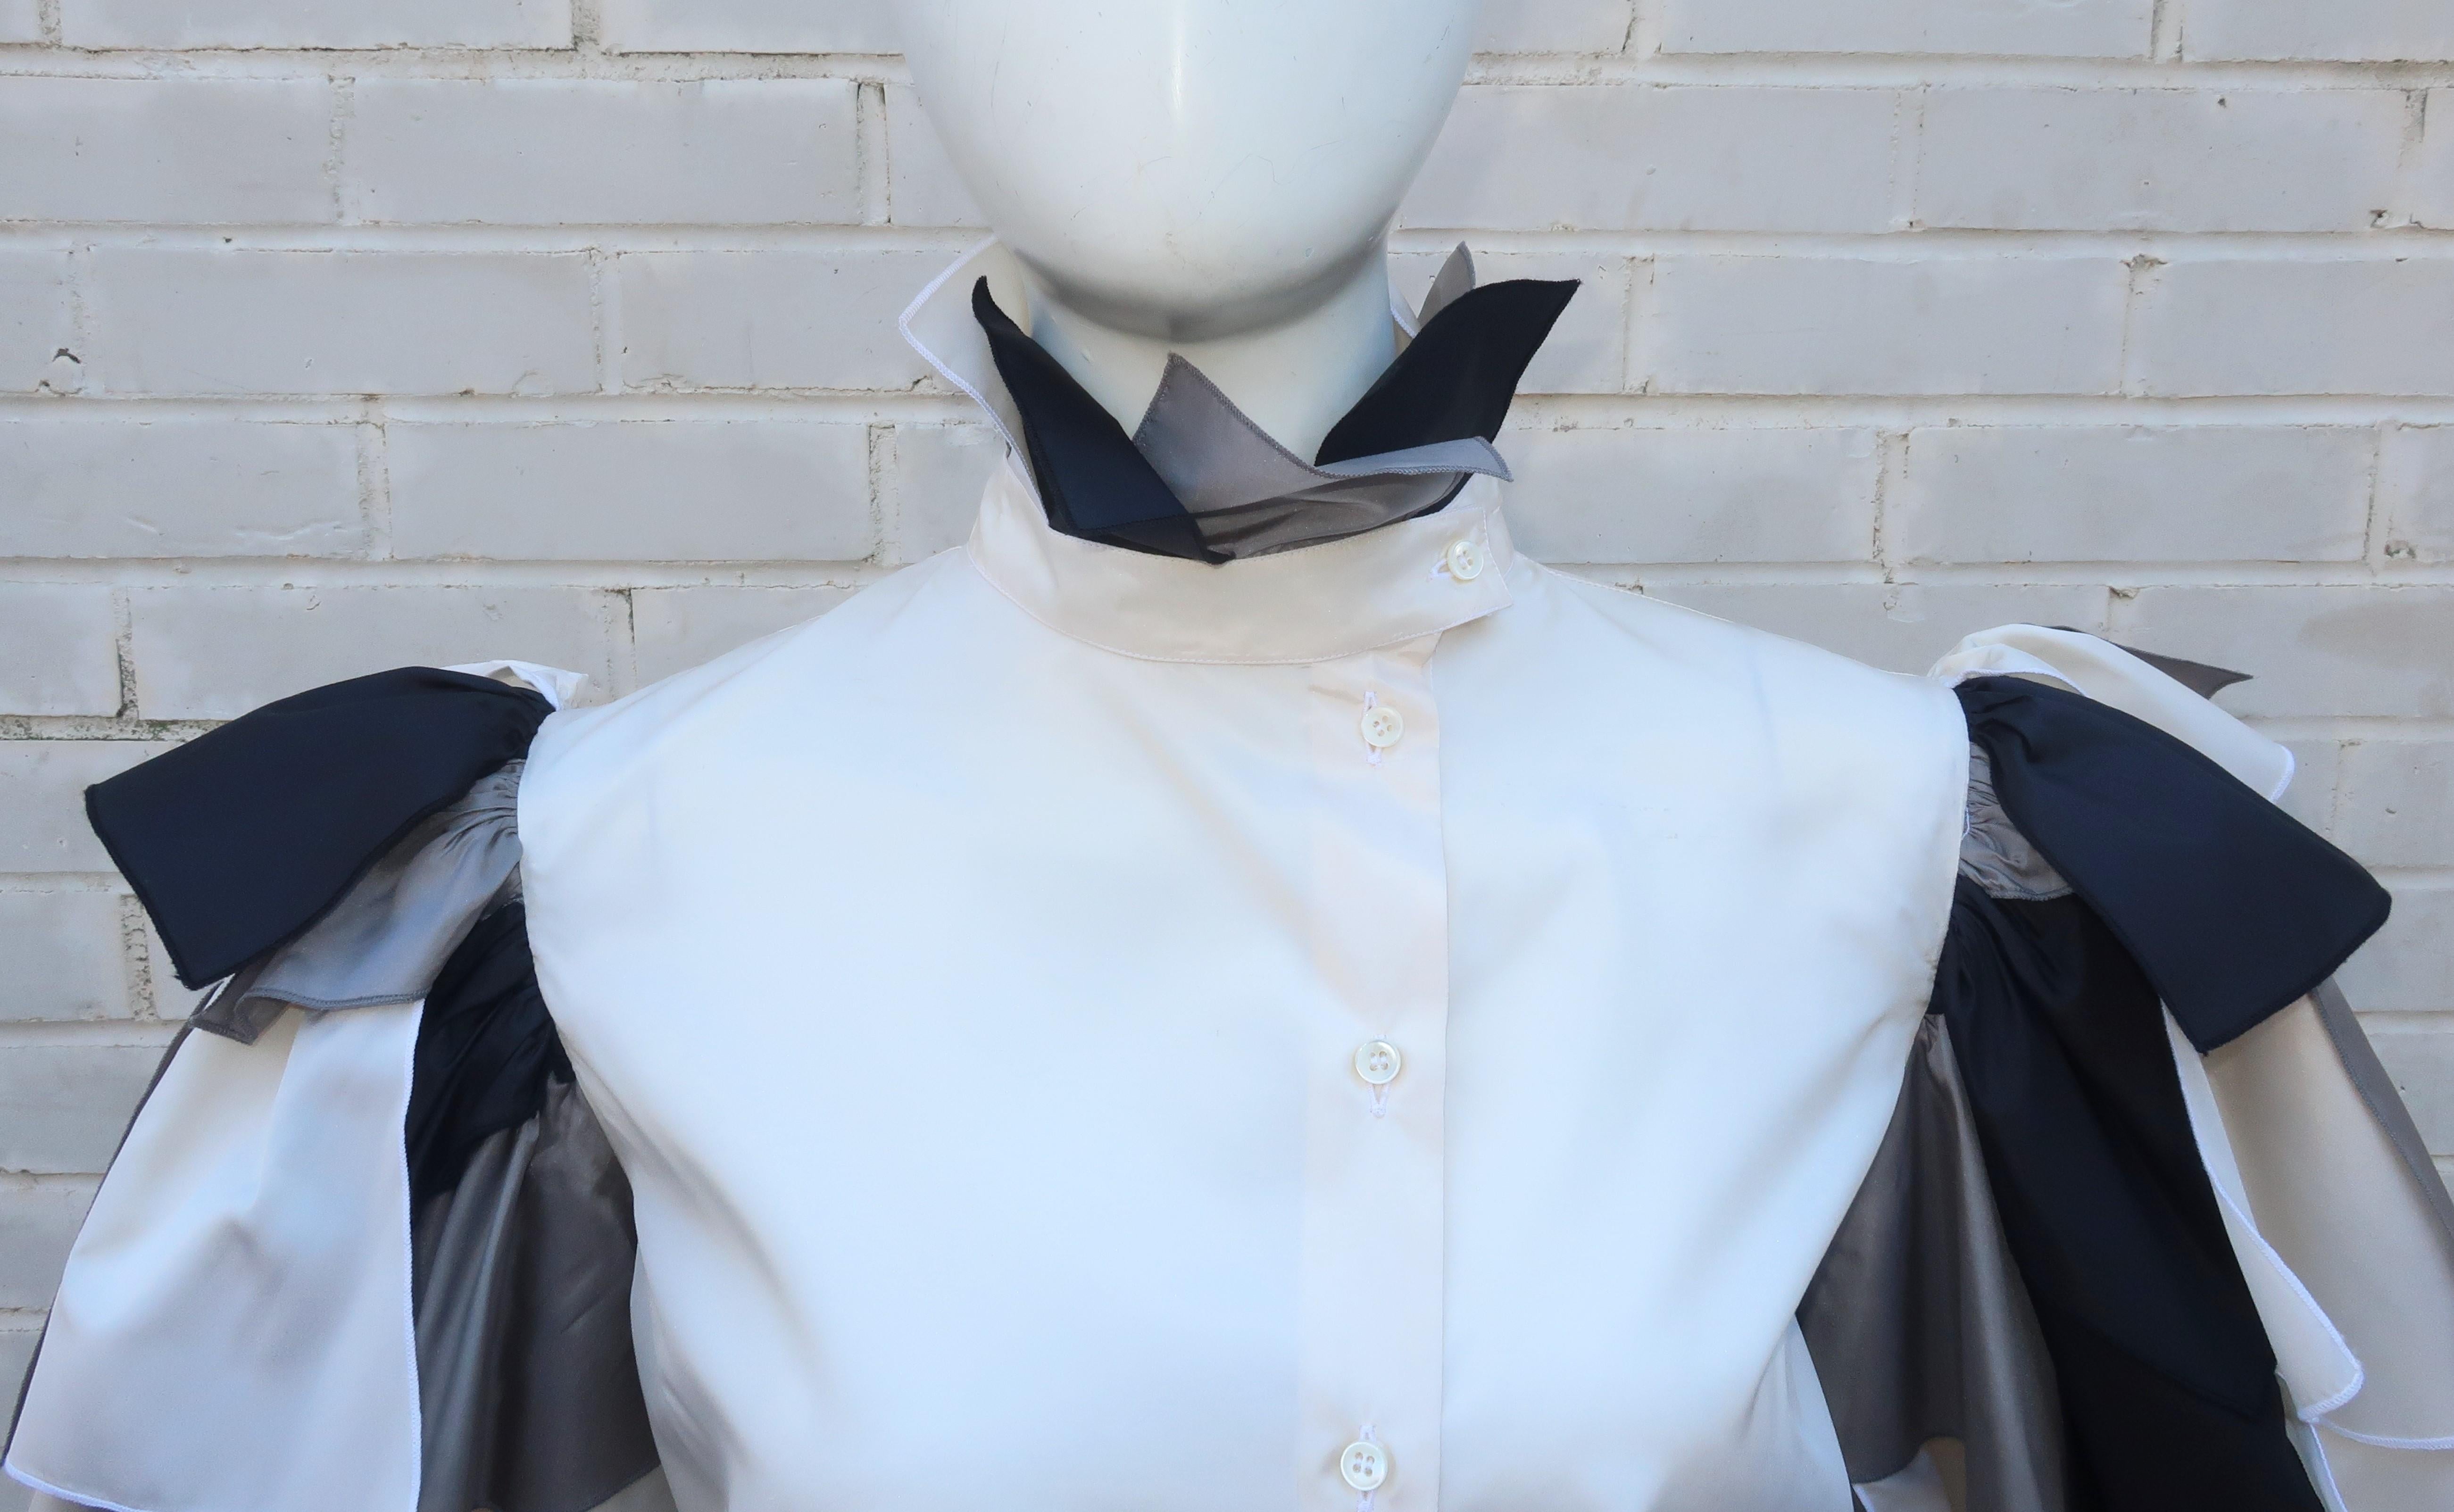 It is all about the sleeves with this adorable Italian silk taffeta blouse in shades of candlelight white, black and silvery gray.  The body of the blouse buttons up the front with an asymmetrical tab collar adorned with fabric swatches reminiscent